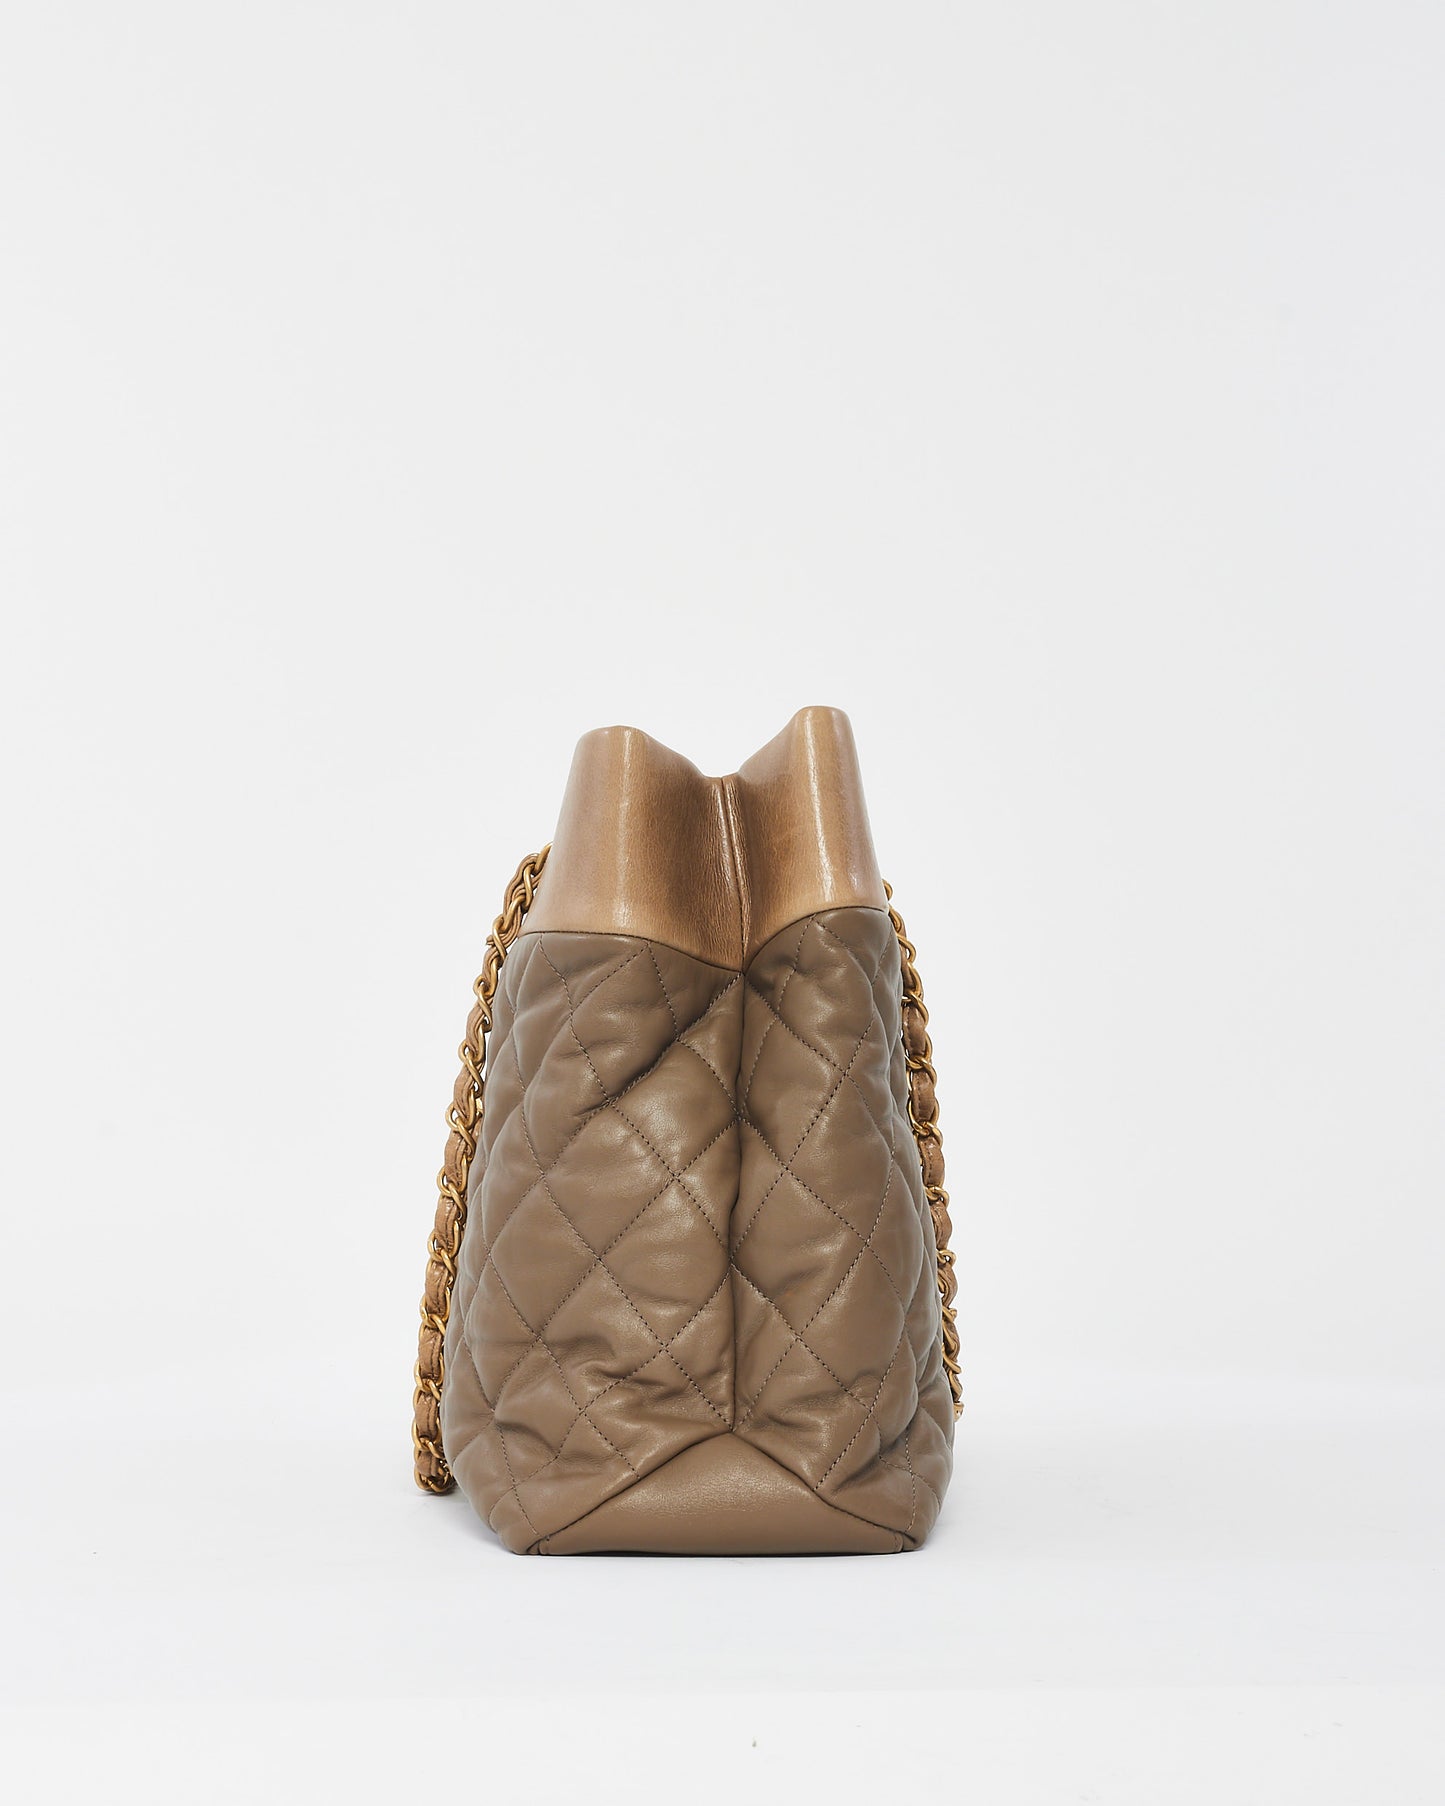 Chanel Brown Soft Quilted Leather Large Elegance Tote